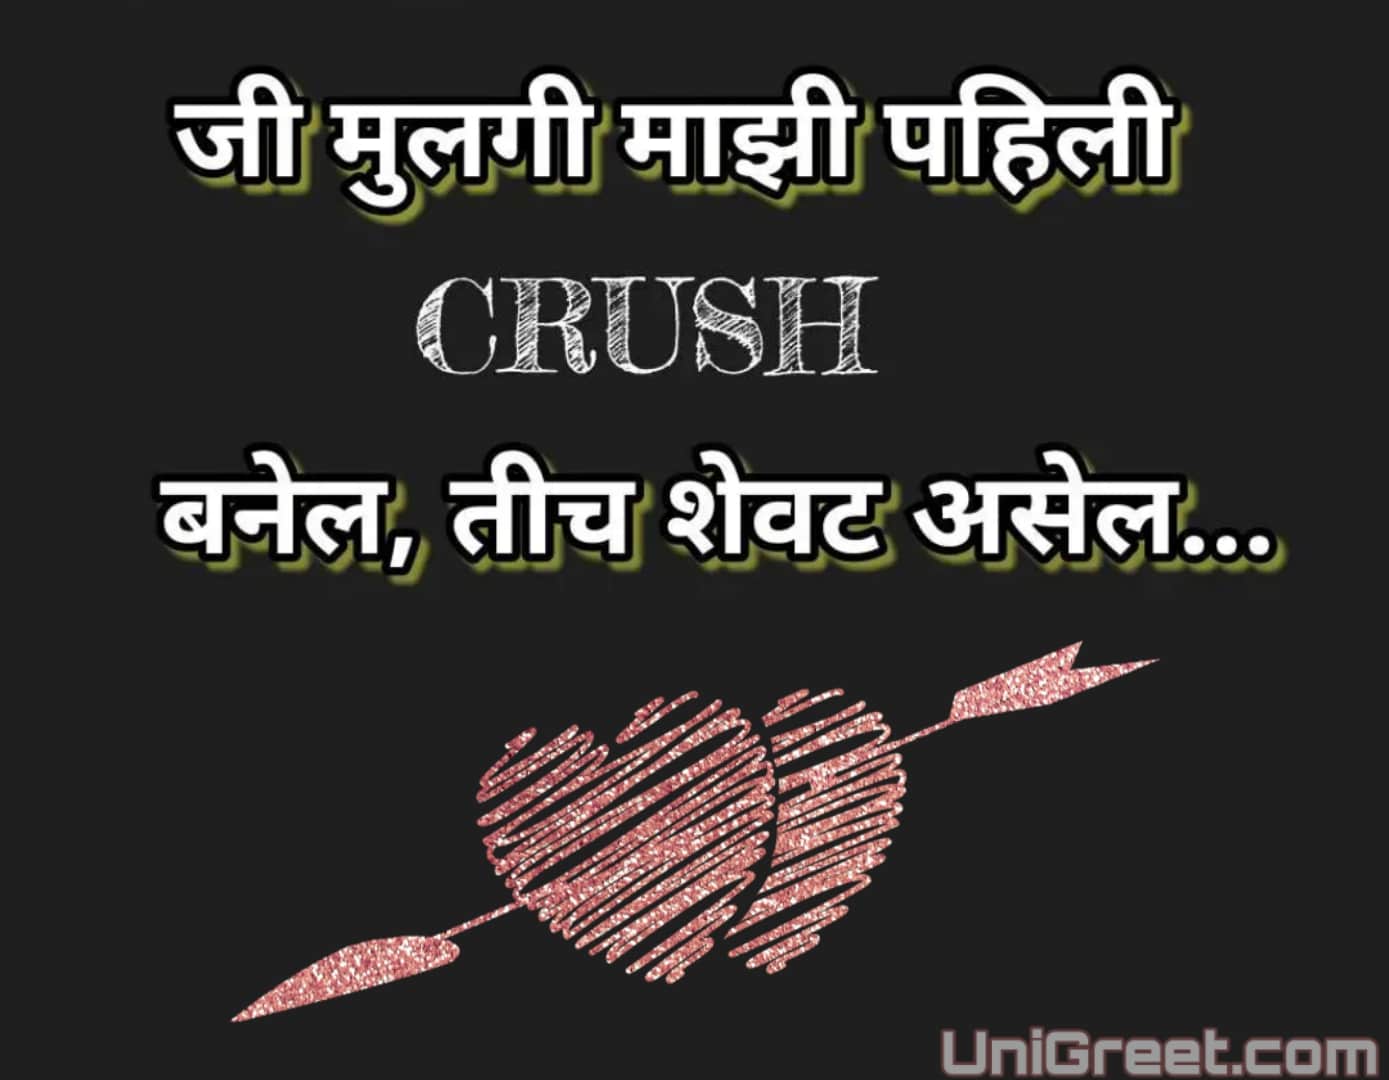 Get The Best Single Status Marathi Images For Boy And Girls With Single Att...